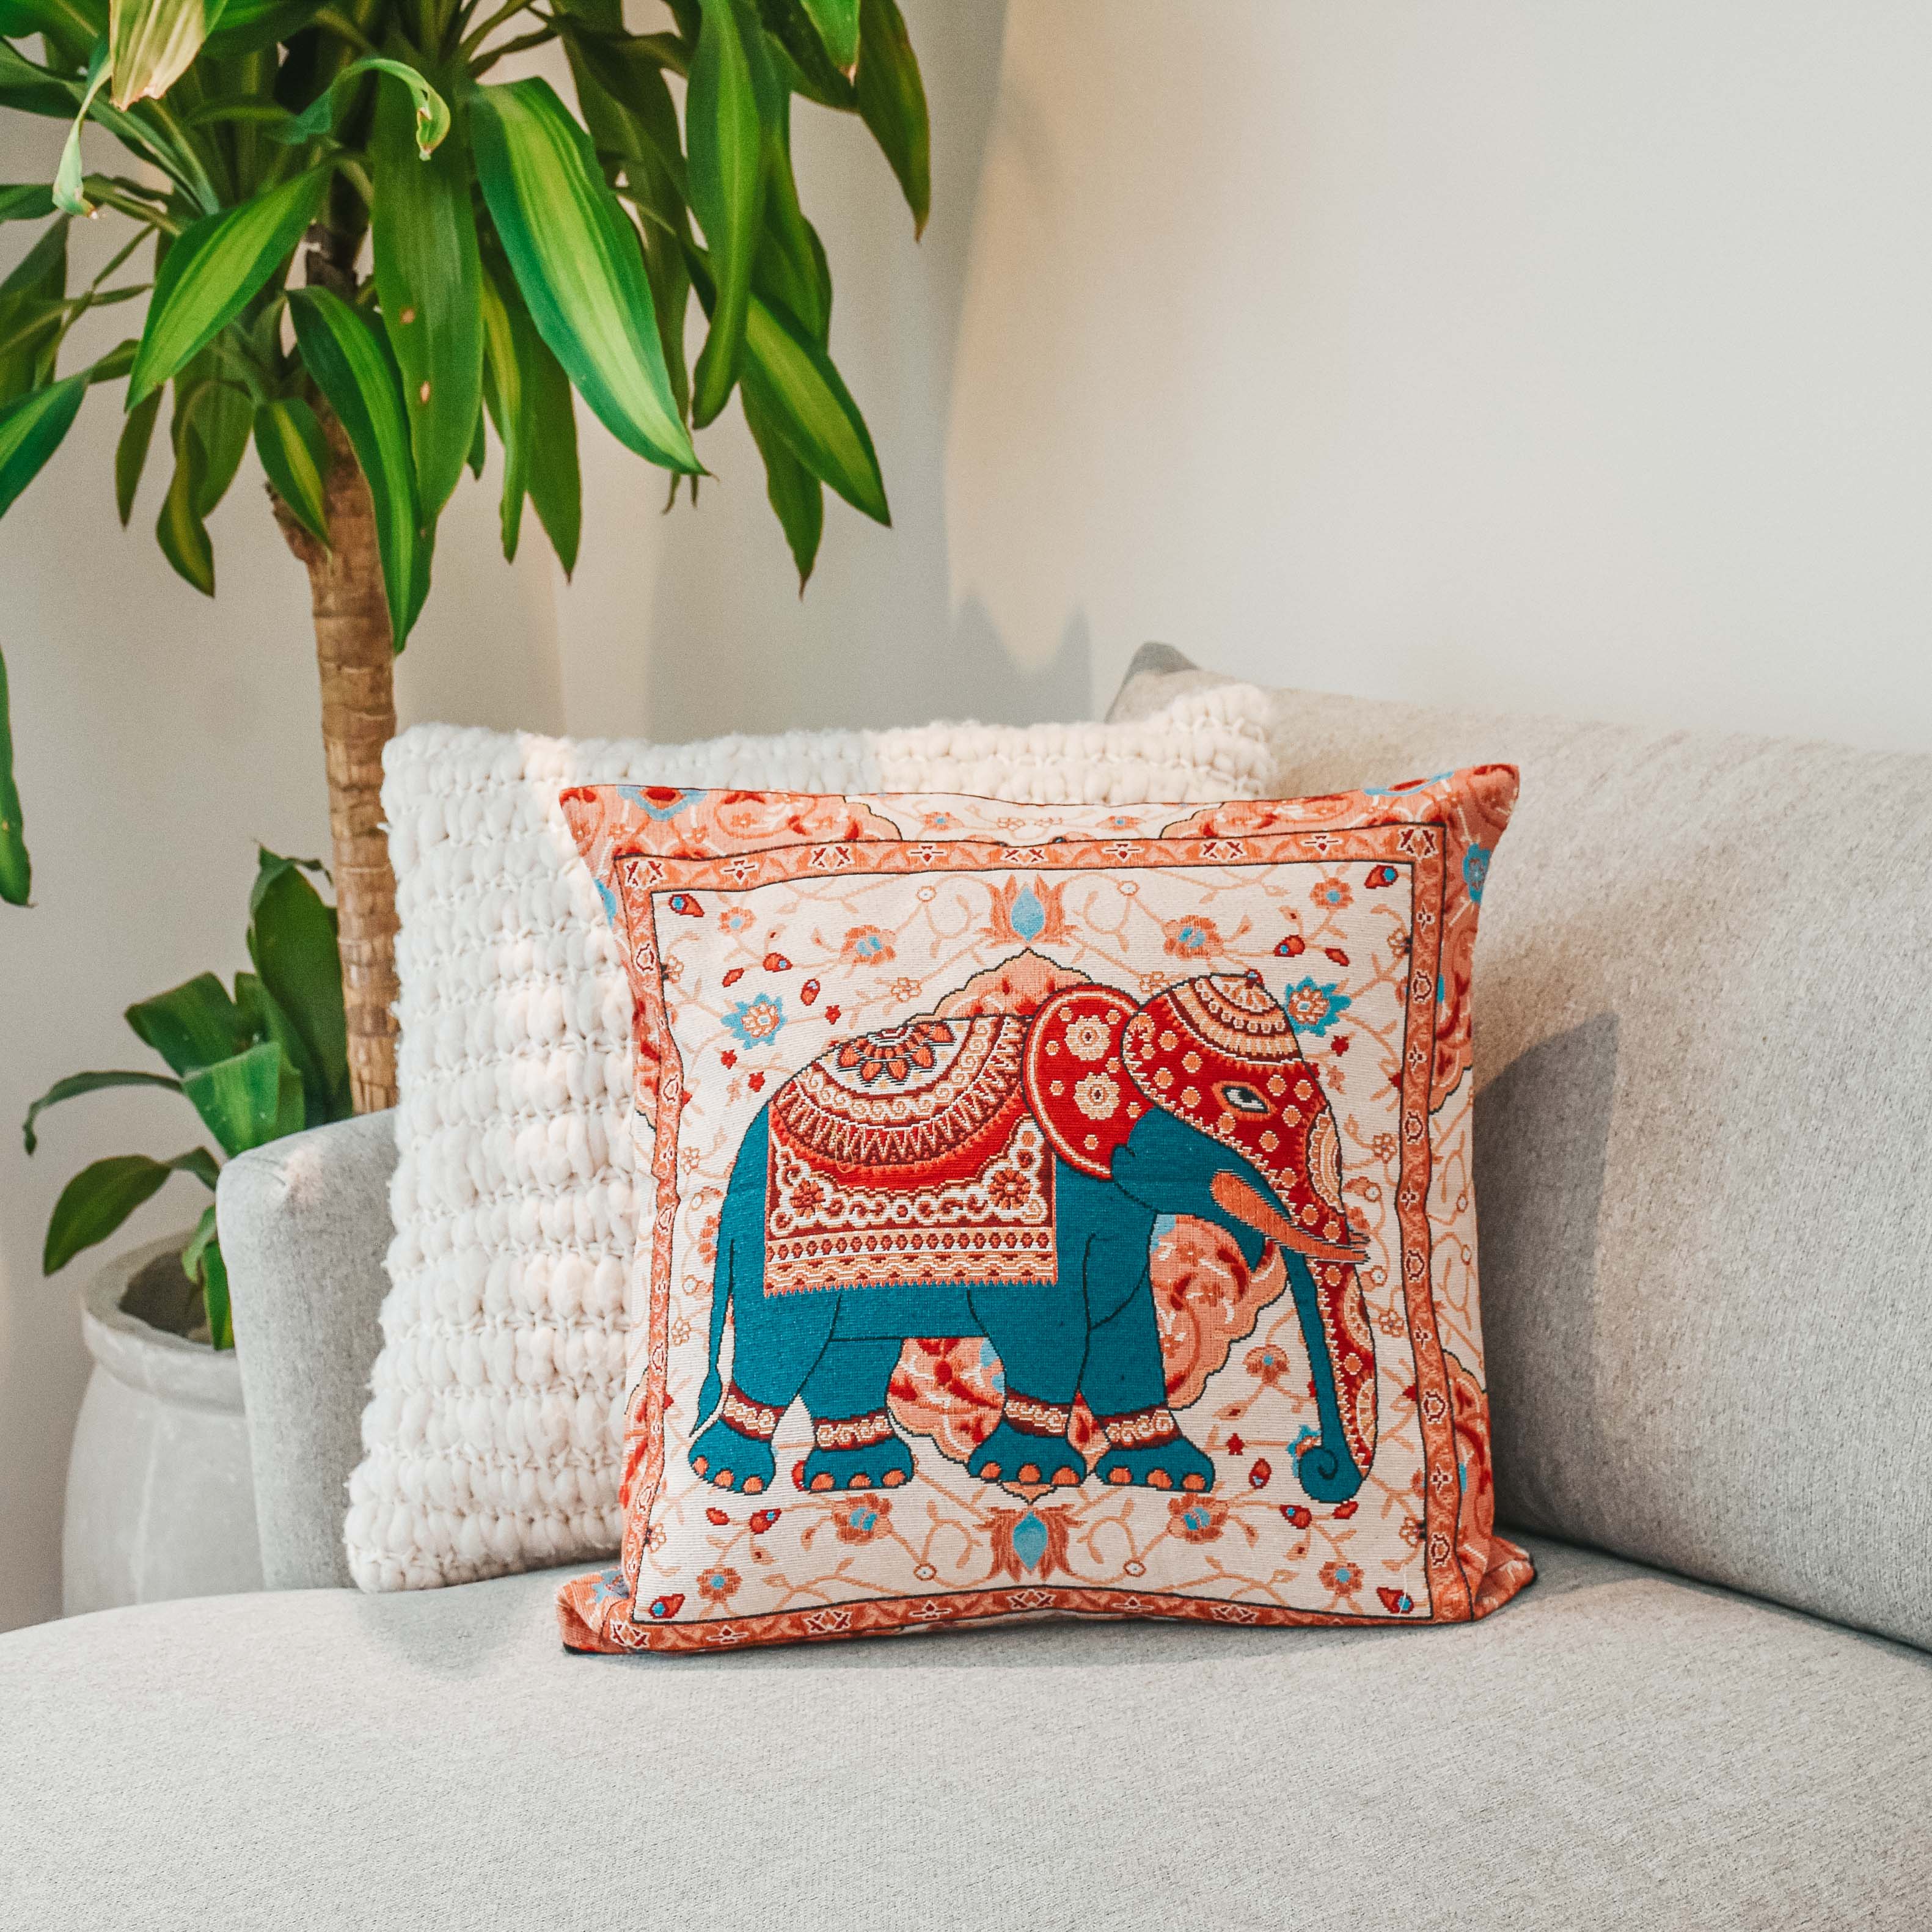 SELVA PILLOW COVER Elepanta Pillows - Buy Today Elephant Pants Jewelry And Bohemian Clothes Handmade In Thailand Help To Save The Elephants FairTrade And Vegan